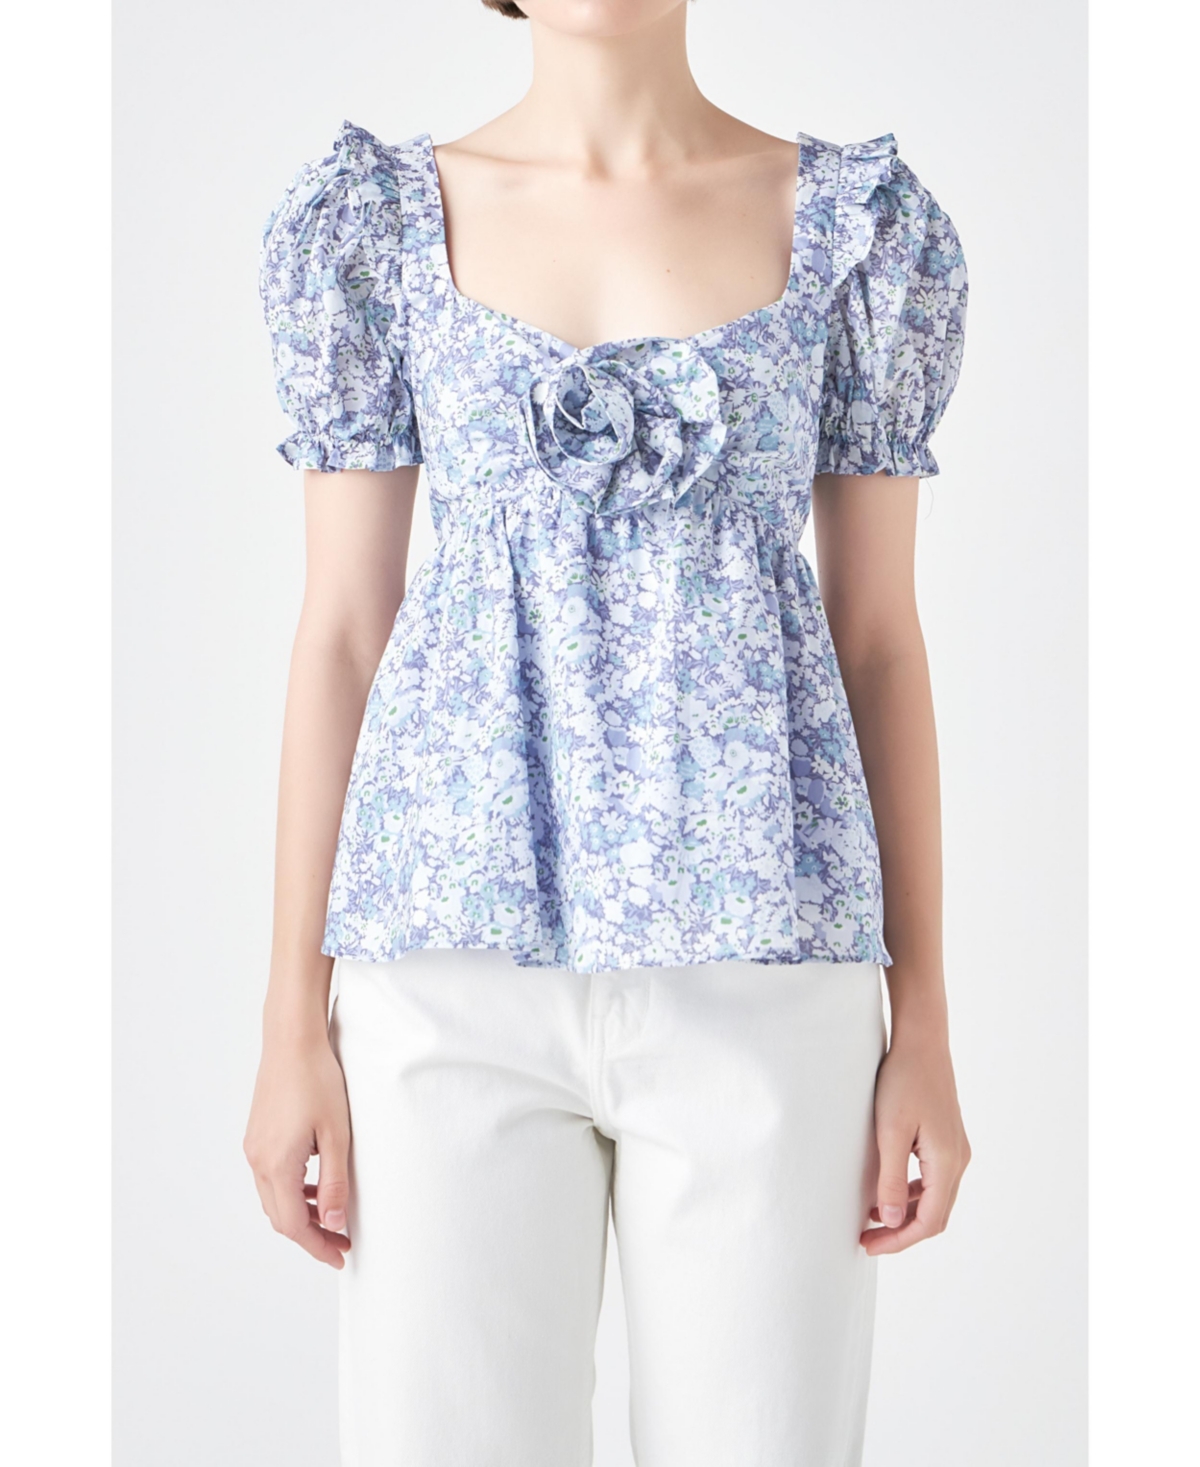 ENGLISH FACTORY WOMEN'S FLORAL PRINT TOP WITH FLOWER